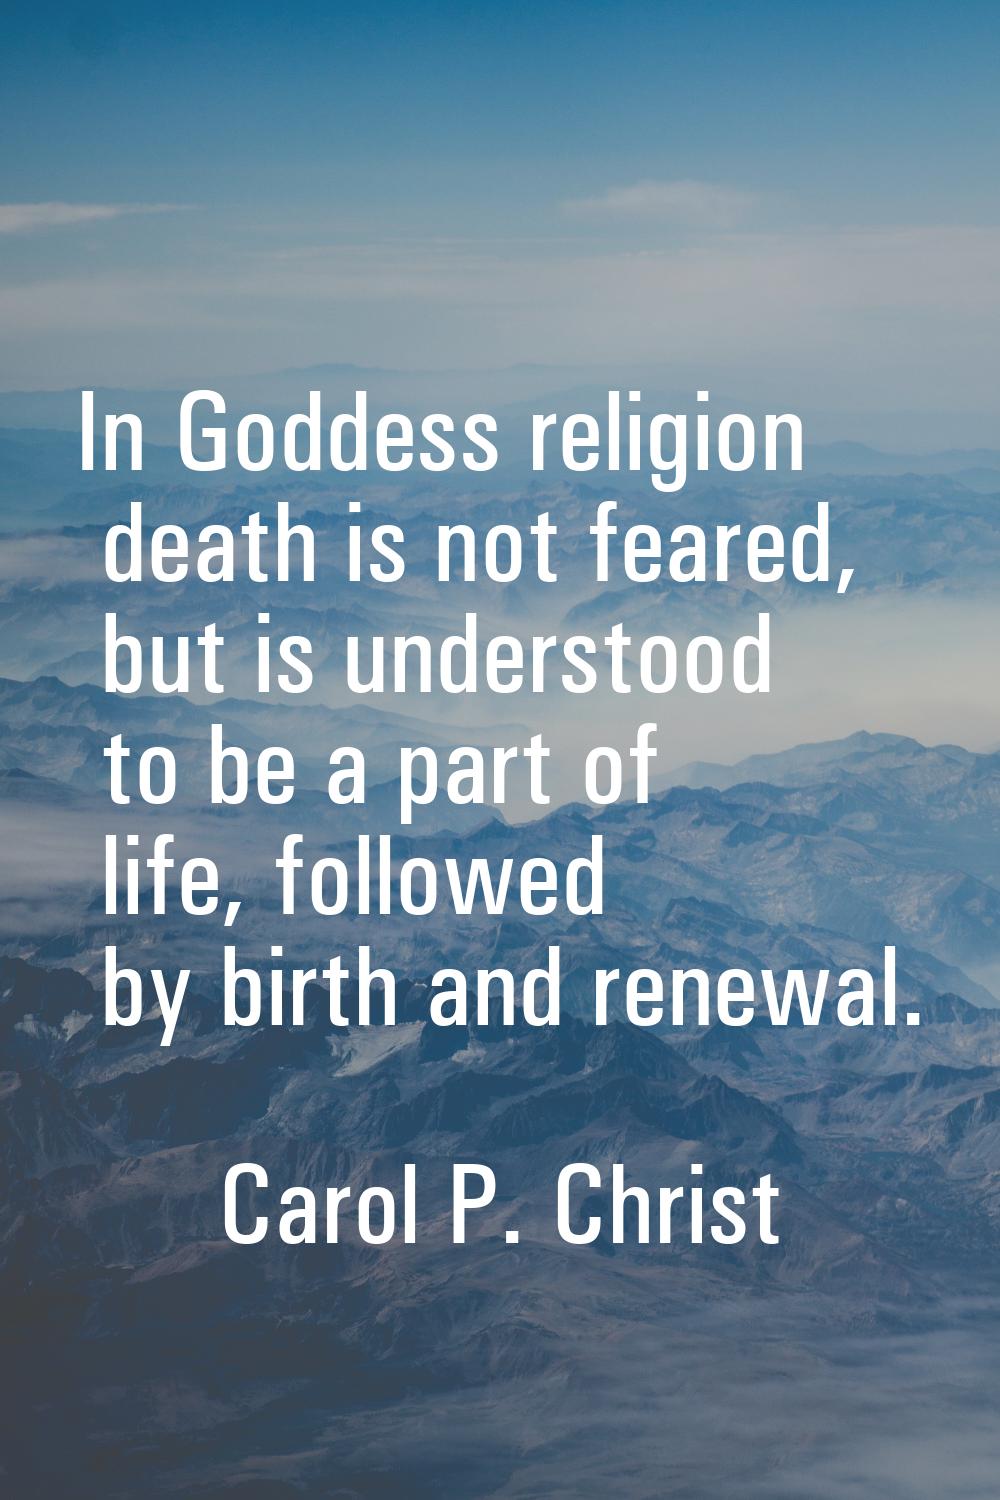 In Goddess religion death is not feared, but is understood to be a part of life, followed by birth 